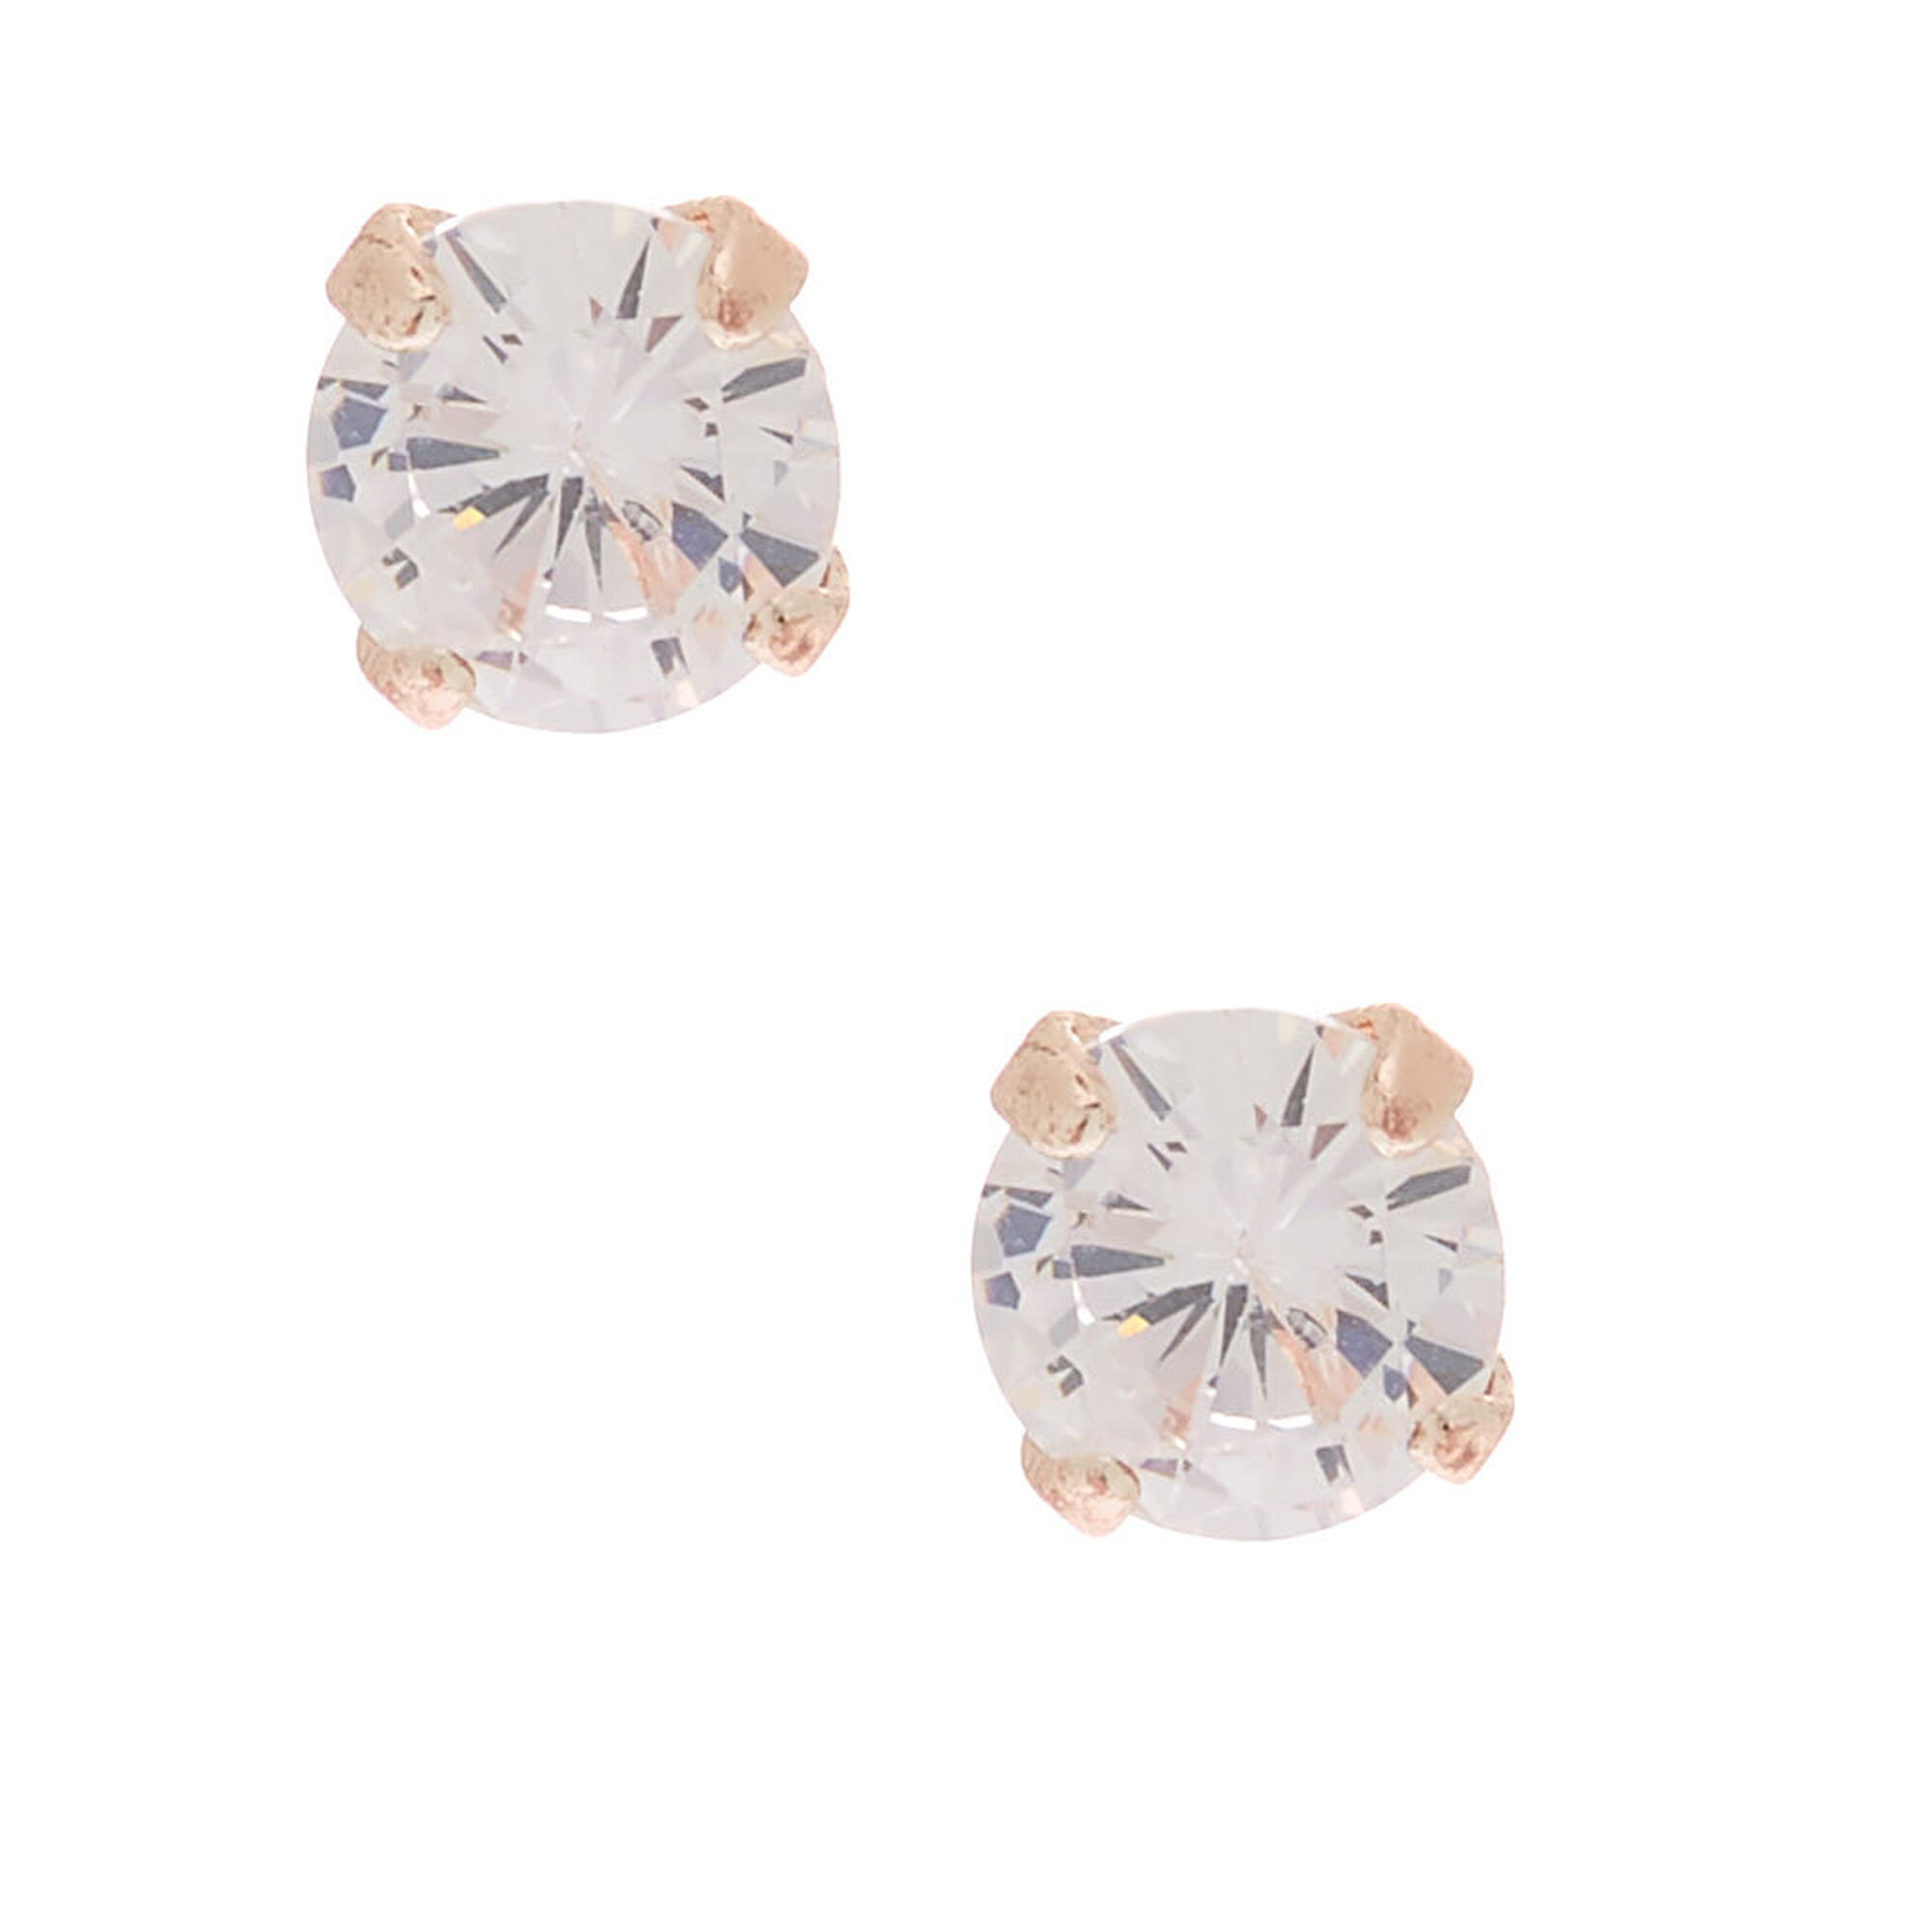 View Claires Tone Cubic Zirconia 5MM Round Stud Earrings Rose Gold information